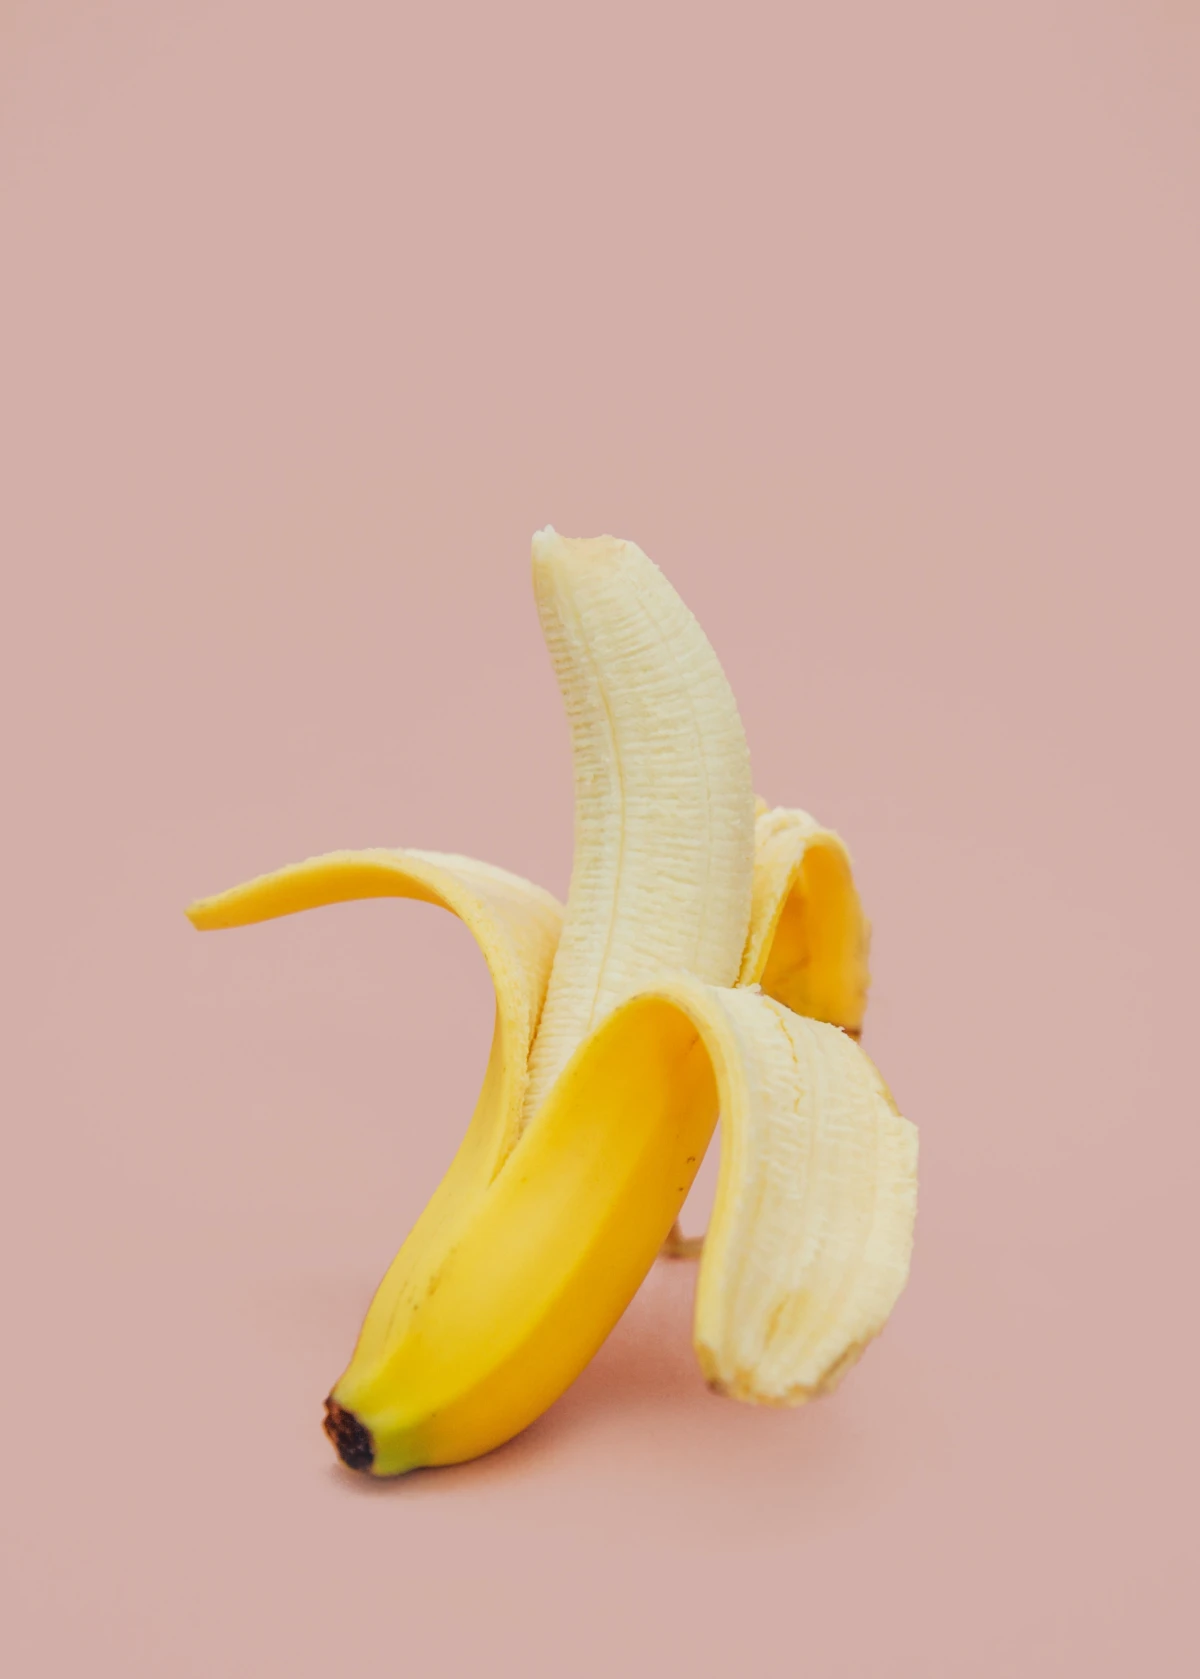 foods high in potassium banana on pink background